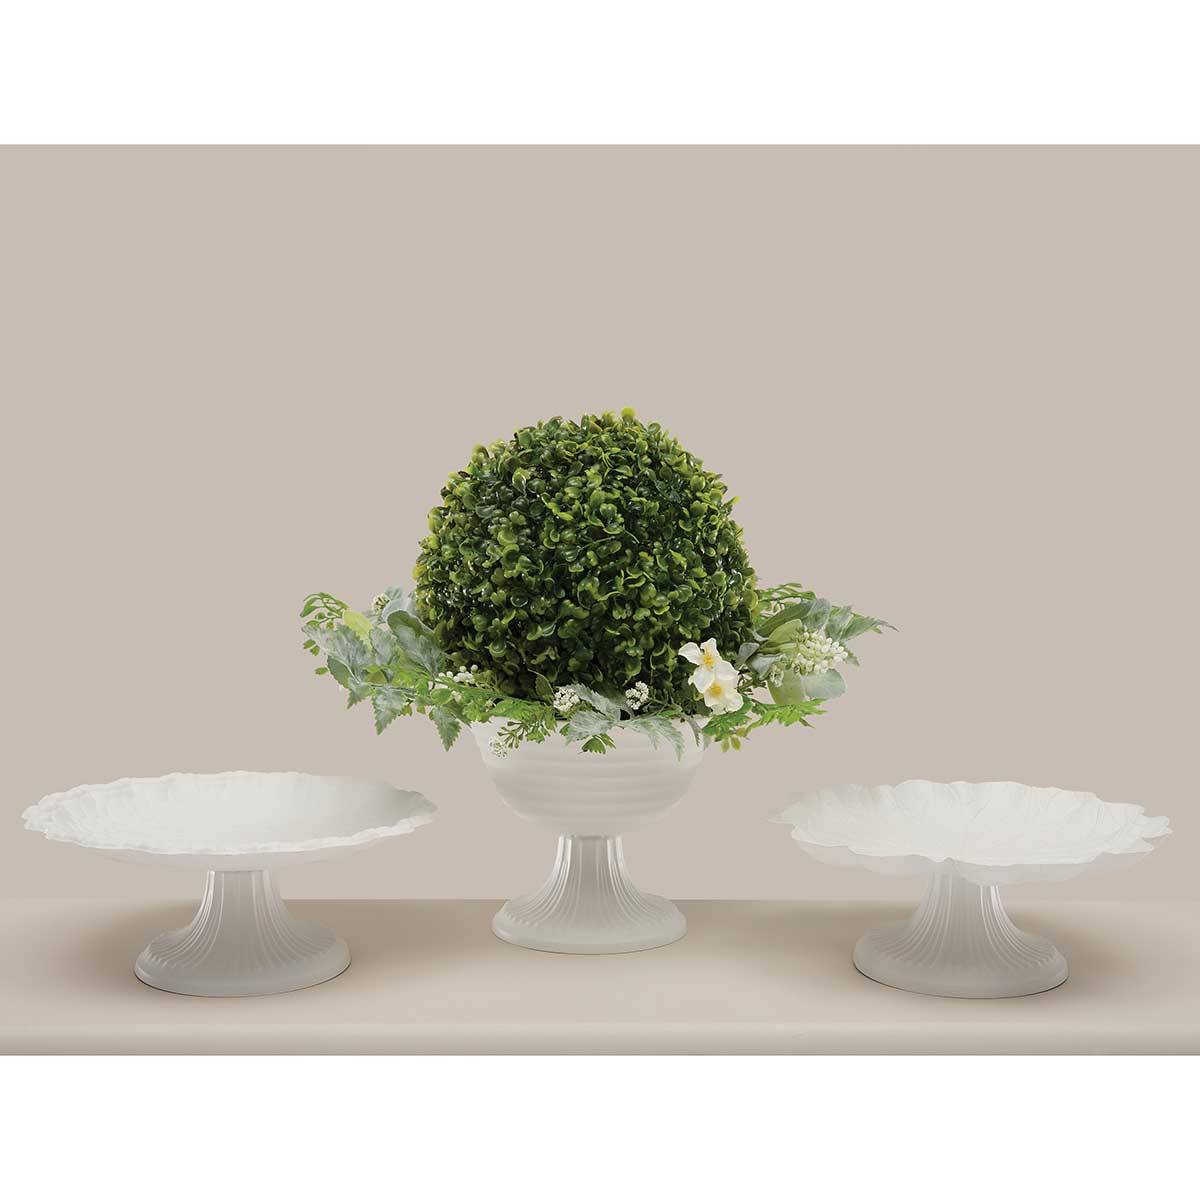 COMPOTE BOWL 7.75IN X 6.25IN MATTE WHITE METAL